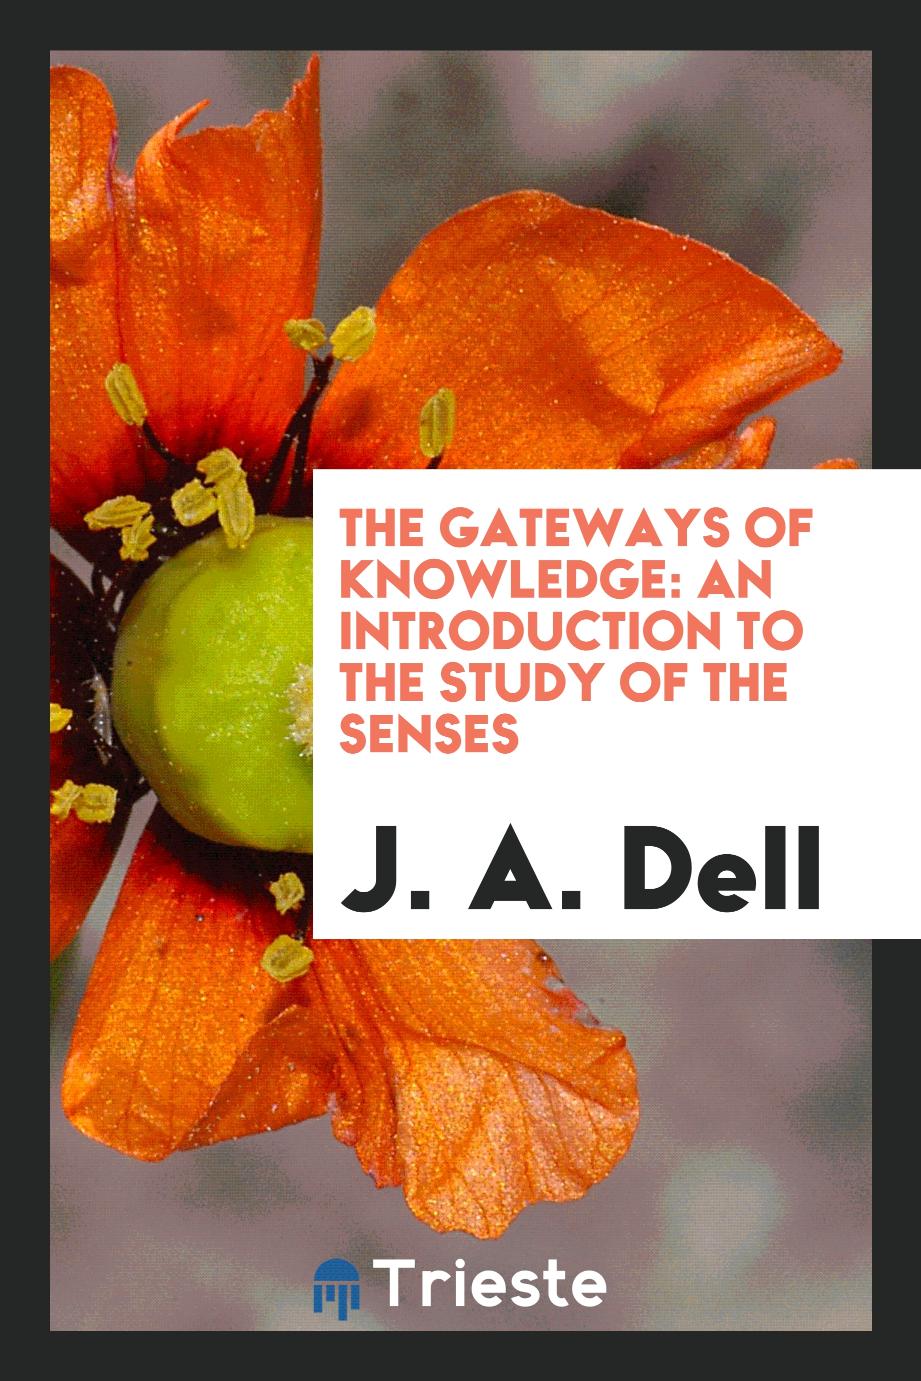 The gateways of knowledge: an introduction to the study of the senses